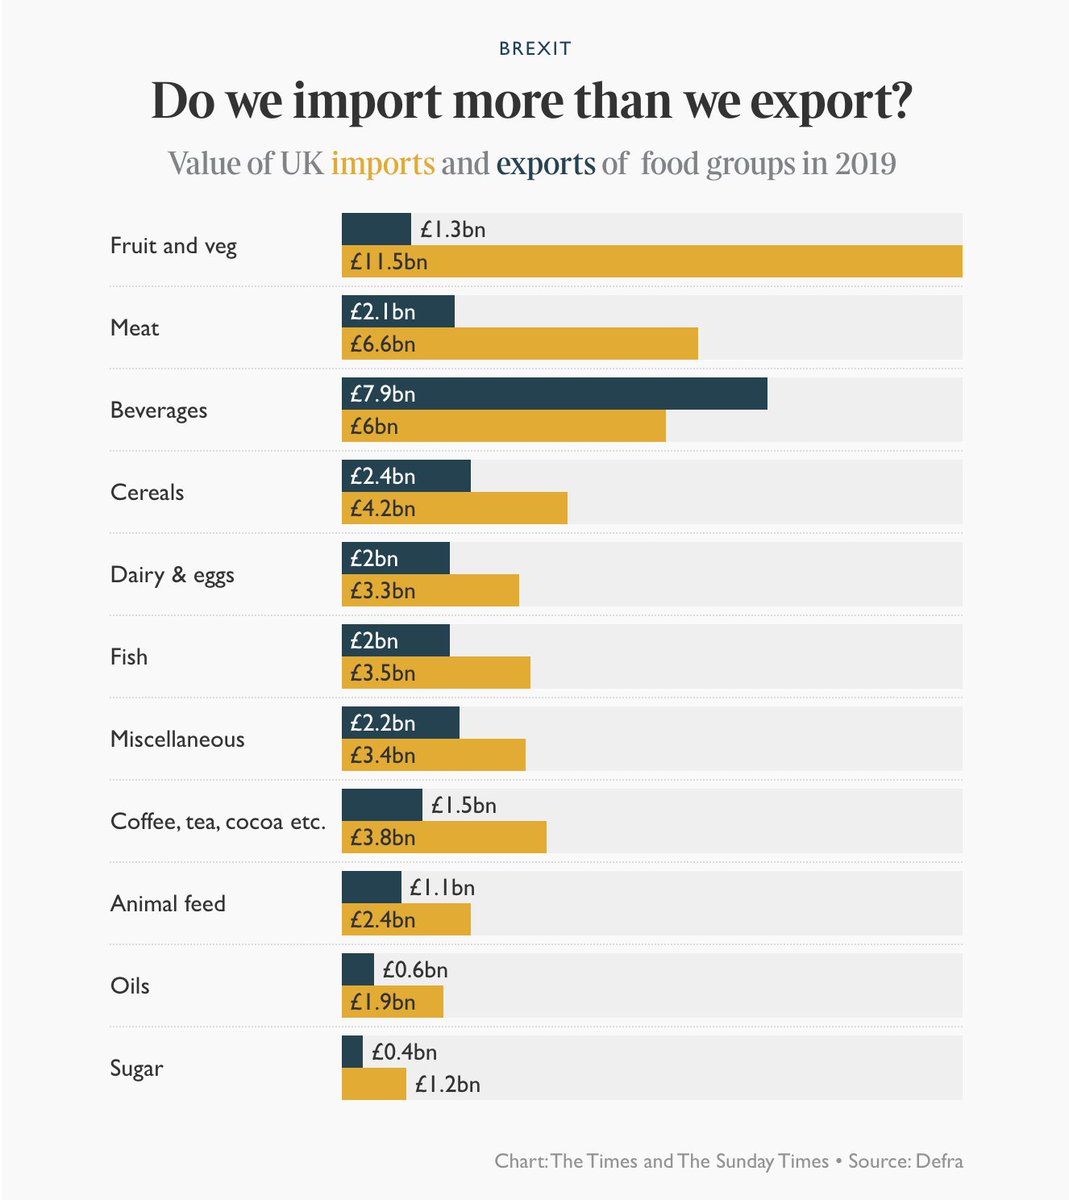 the absence of tariffs means that trade is expected to continue largely as before, though agricultural exports would still face additional costs of up to 10% because of “non-tariff barriers” such as extra paperwork and border checks.